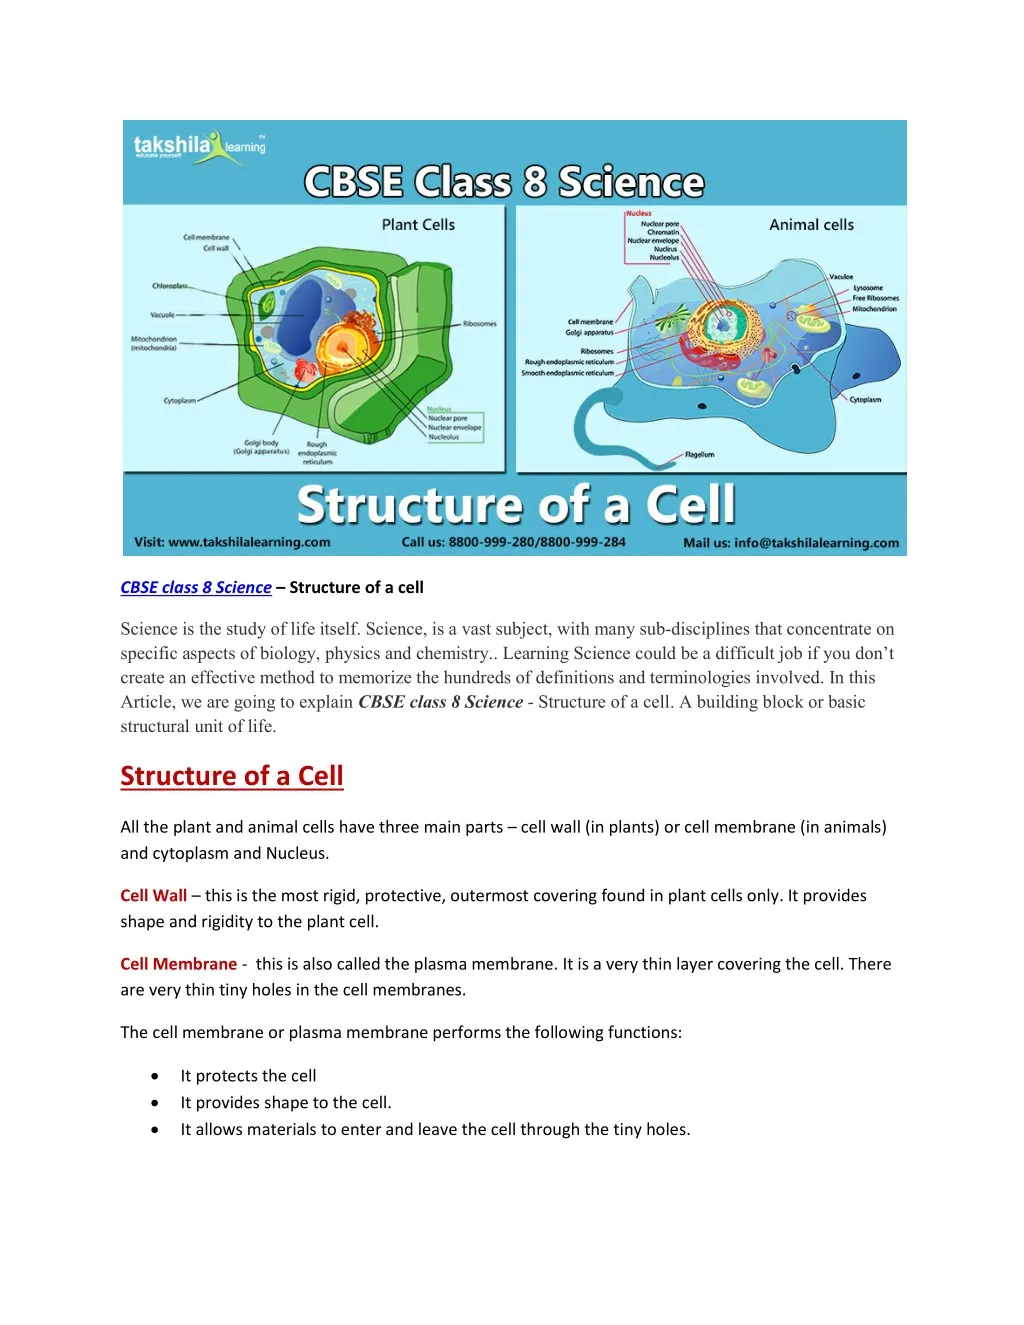 cbse class 8 science structure of a cell